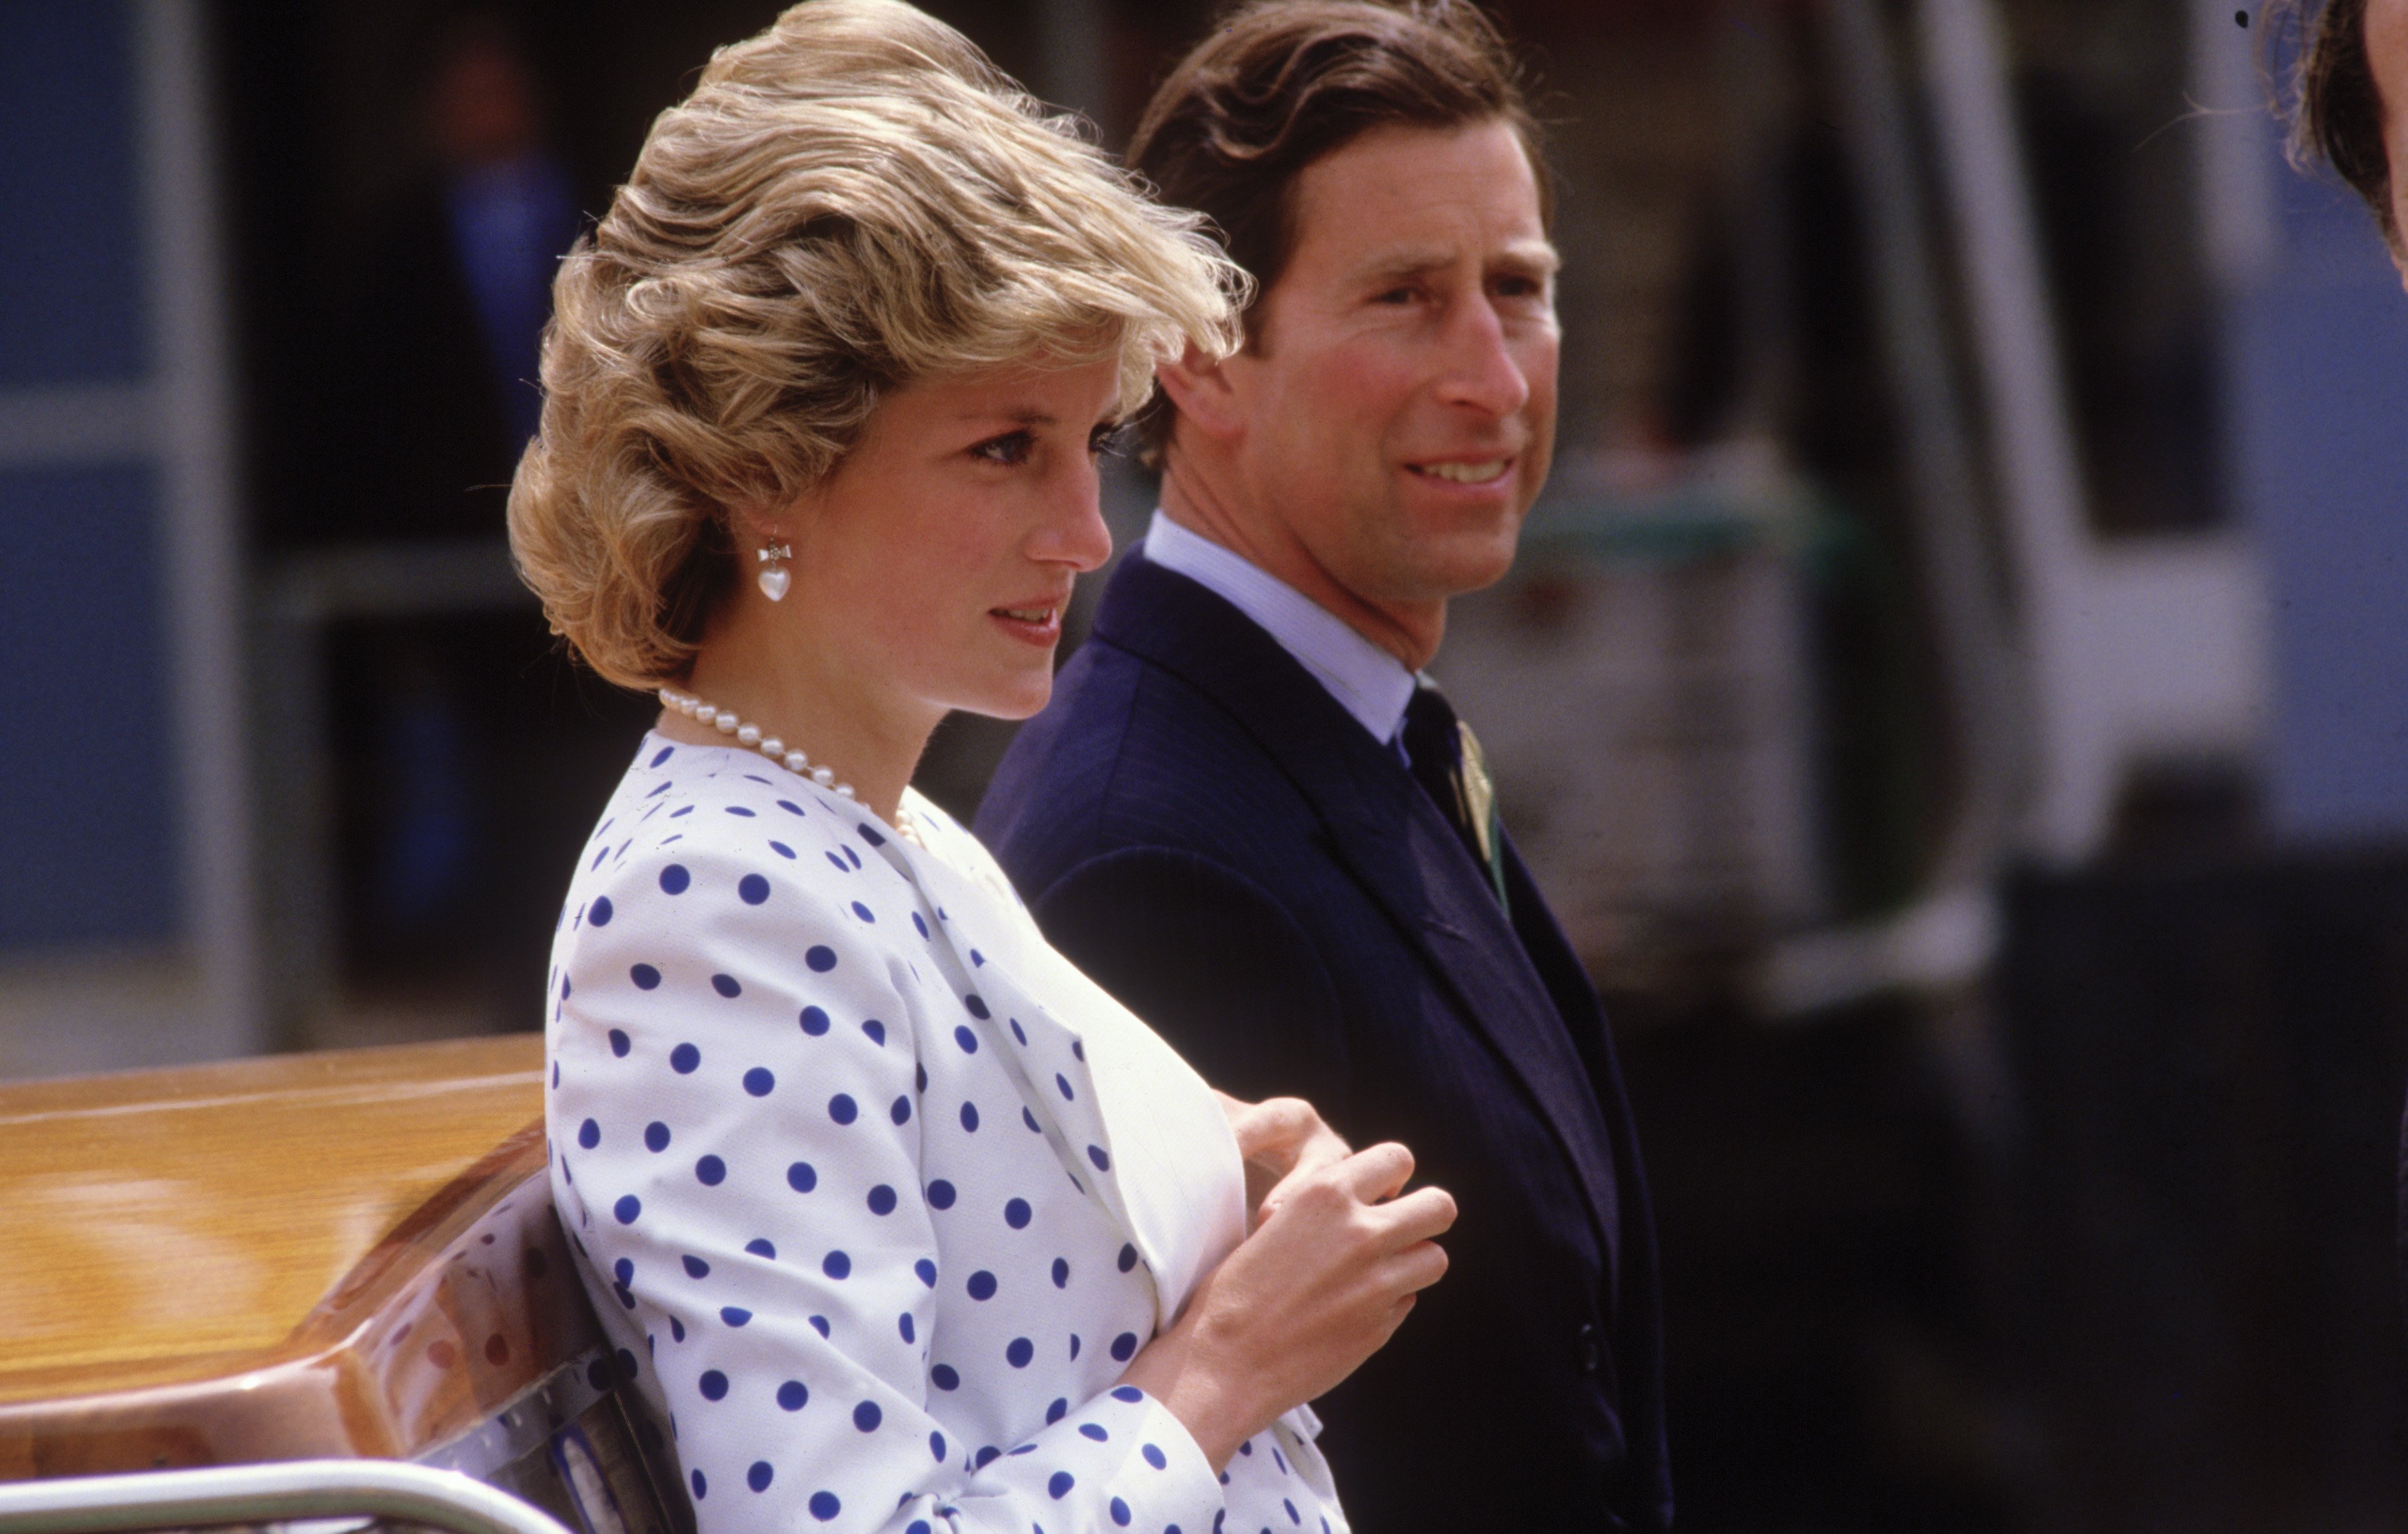 Diana, Princess of Wales and Prince Charles in Venice, Italy on May 4, 1985 | Source: Getty Images